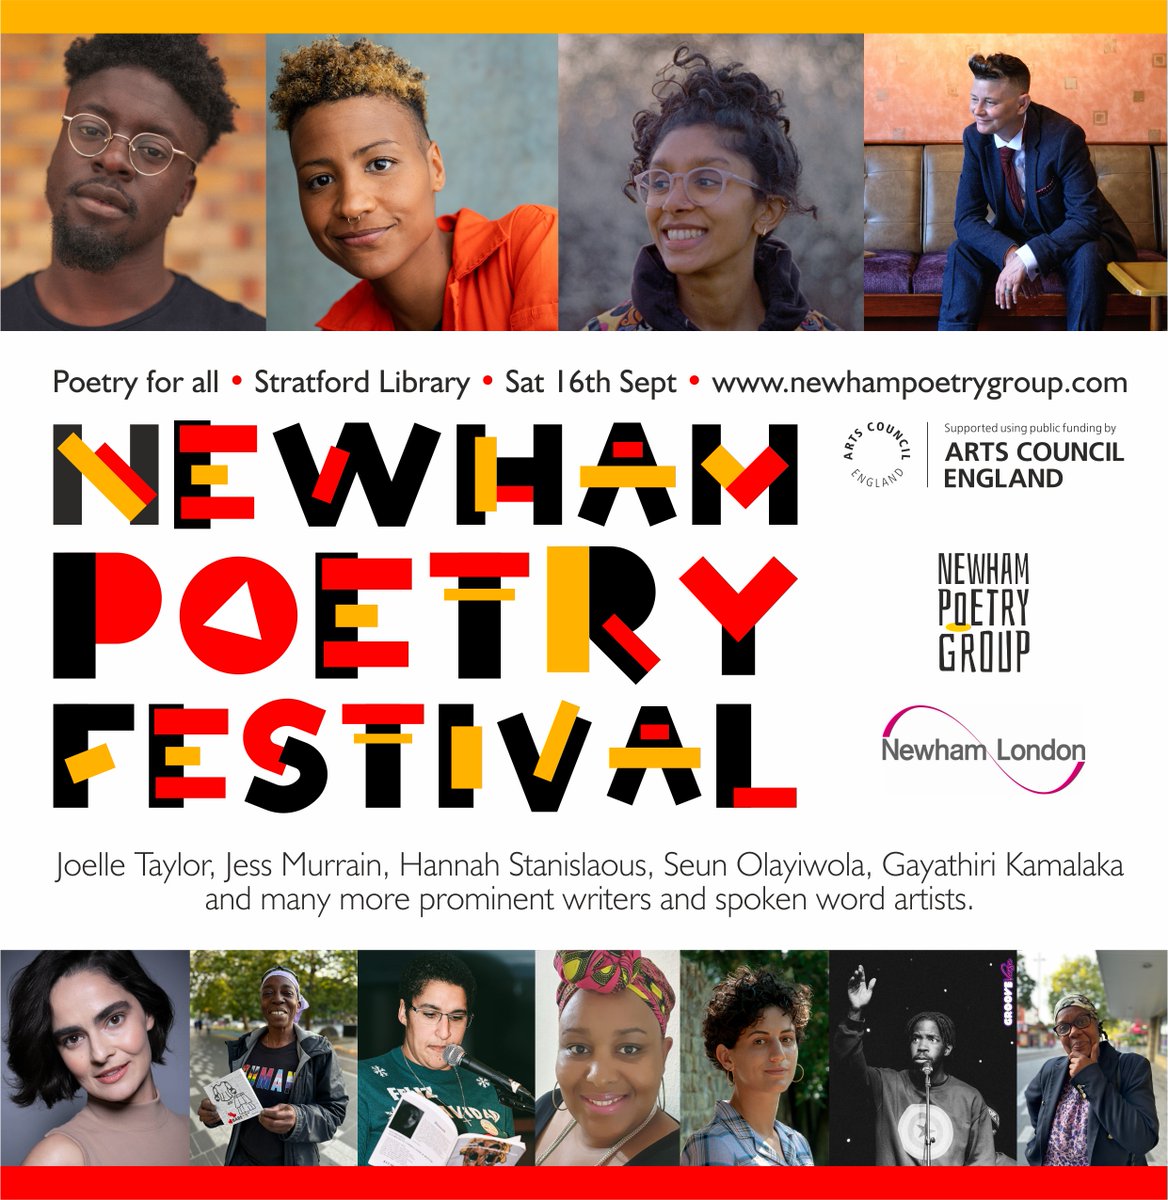 1,2,3,4...🗓️🗓️🗓️Counting down days for the #PoetryFestival 🥳 Saturday 16 at Stratford Library - Get your tickets 🗣️NOW - supported by @ace__london #NewhamTalent #CreativeNewham #NewhamArts #NewhamPoetryFest